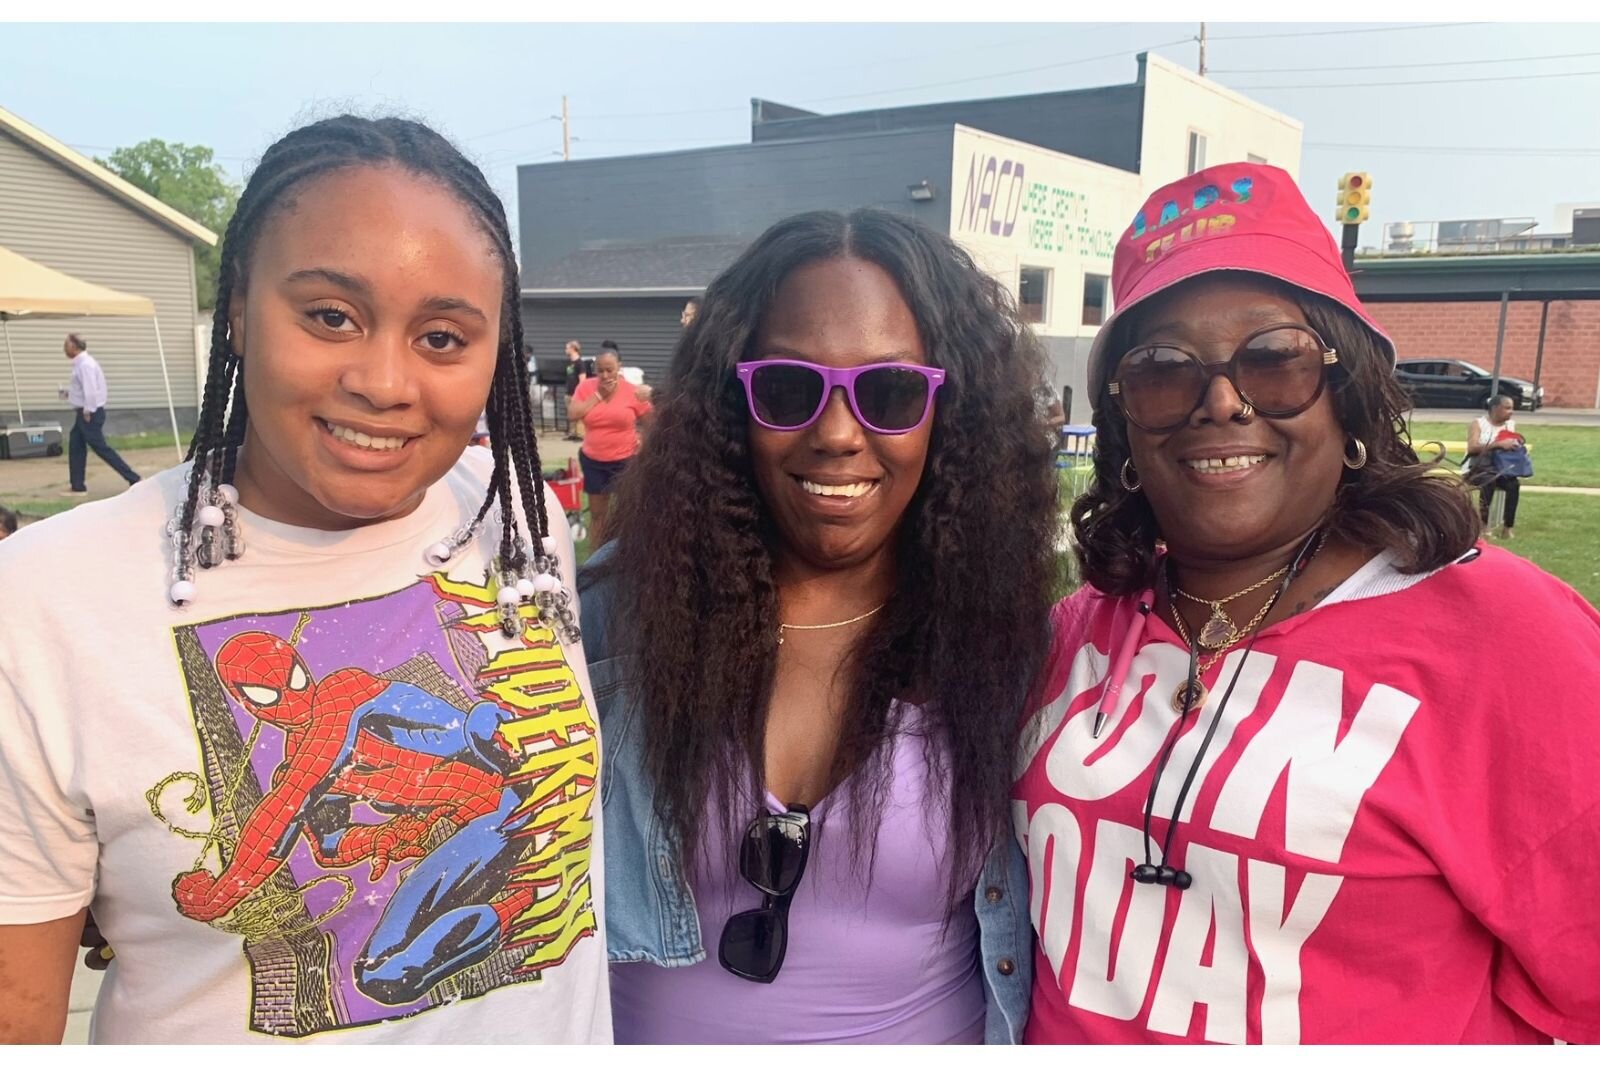 Kalamazoo City Commissioner Tami Rey, center, Hope Thru Navigation Executive Director Gwendolyn Hooker, right, and Rey’s niece Simone Moore, left, participate in the Northside Neighborhood’s National Night Out.